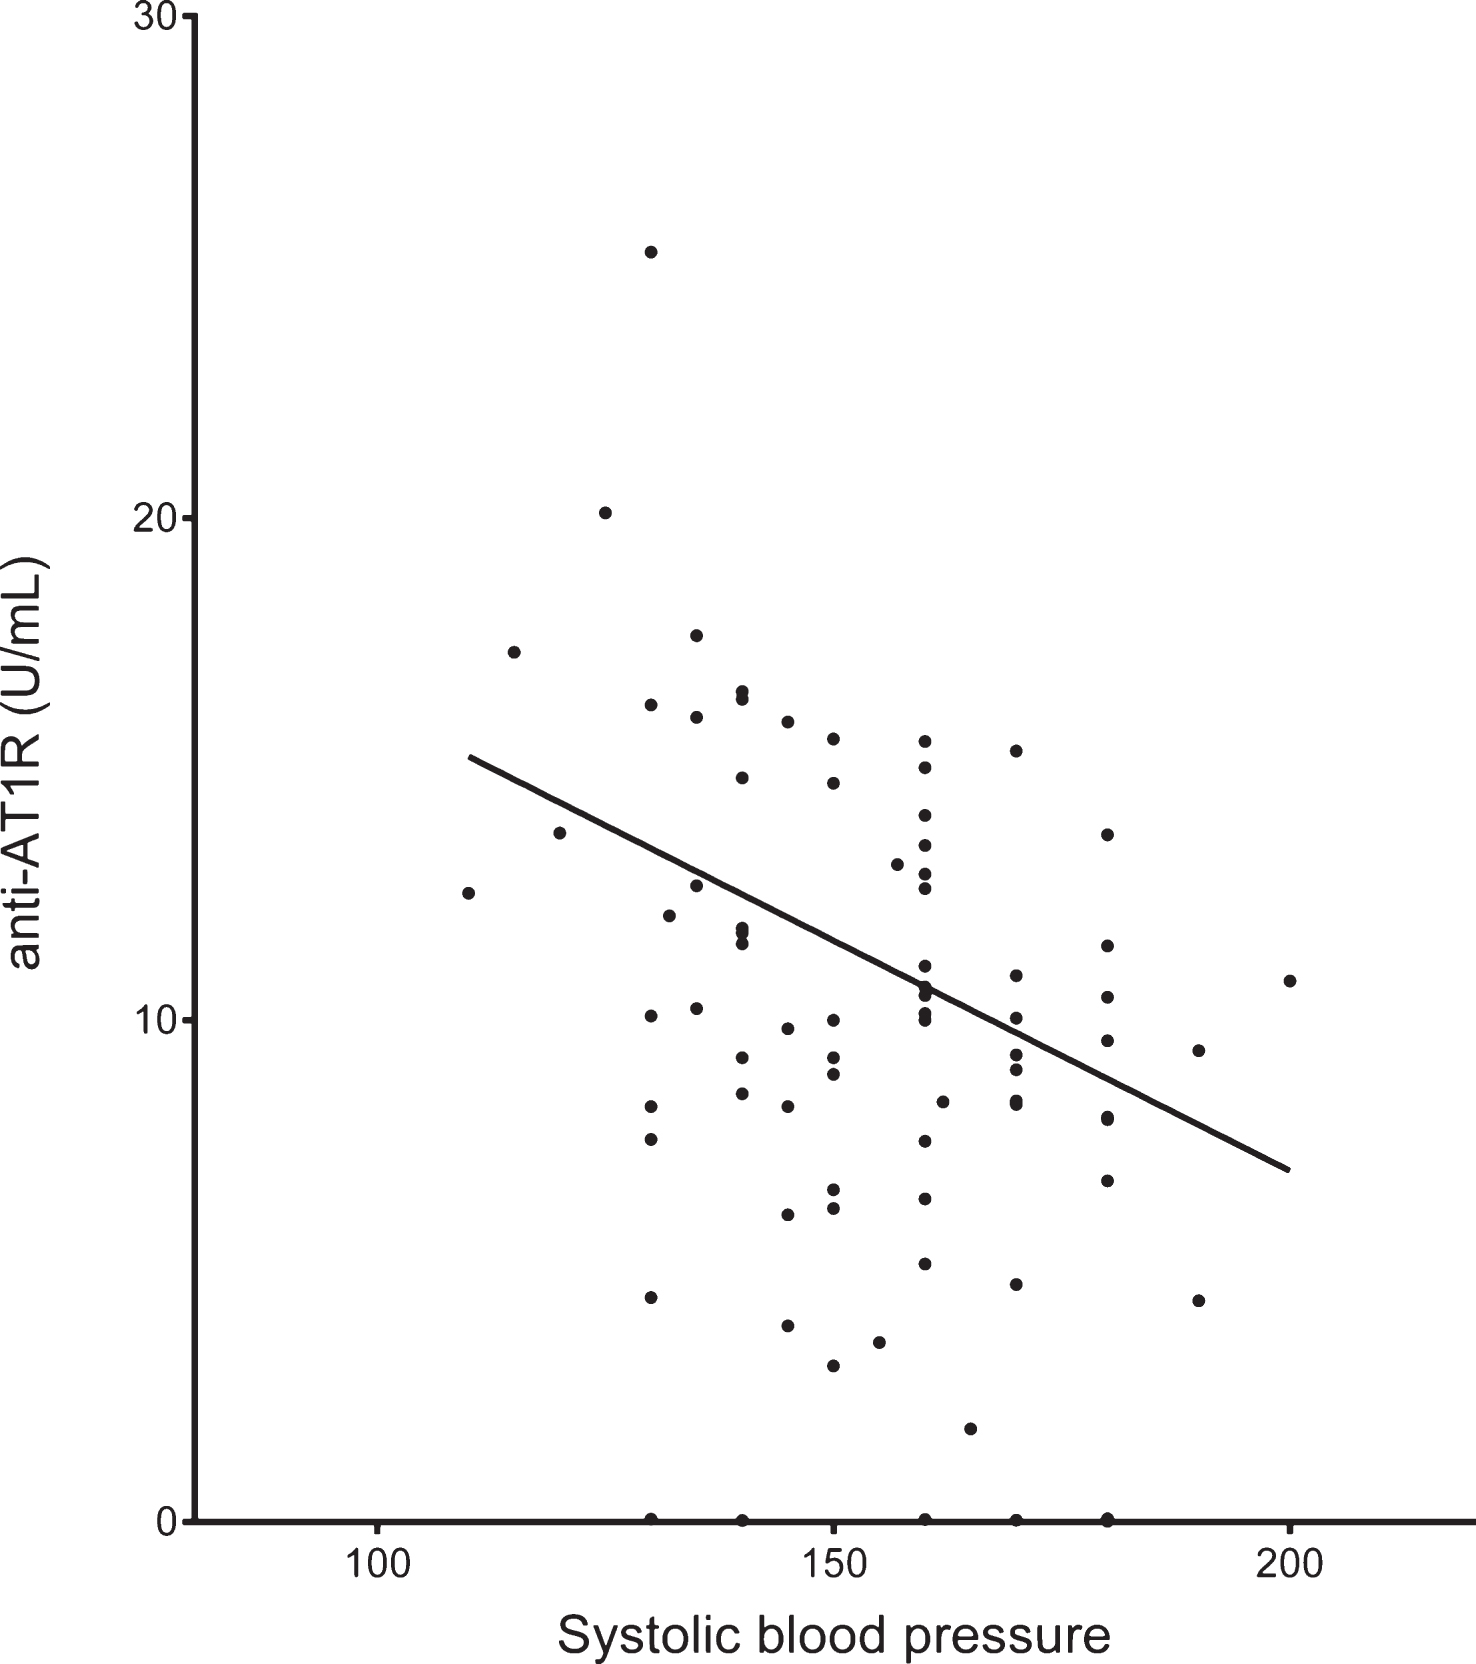 AT1R antibodies correlated negatively with systolic blood pressure in AD patients (n = 87, 6 outliers with anti-AT1R >30 U/mL have been omitted from graph).